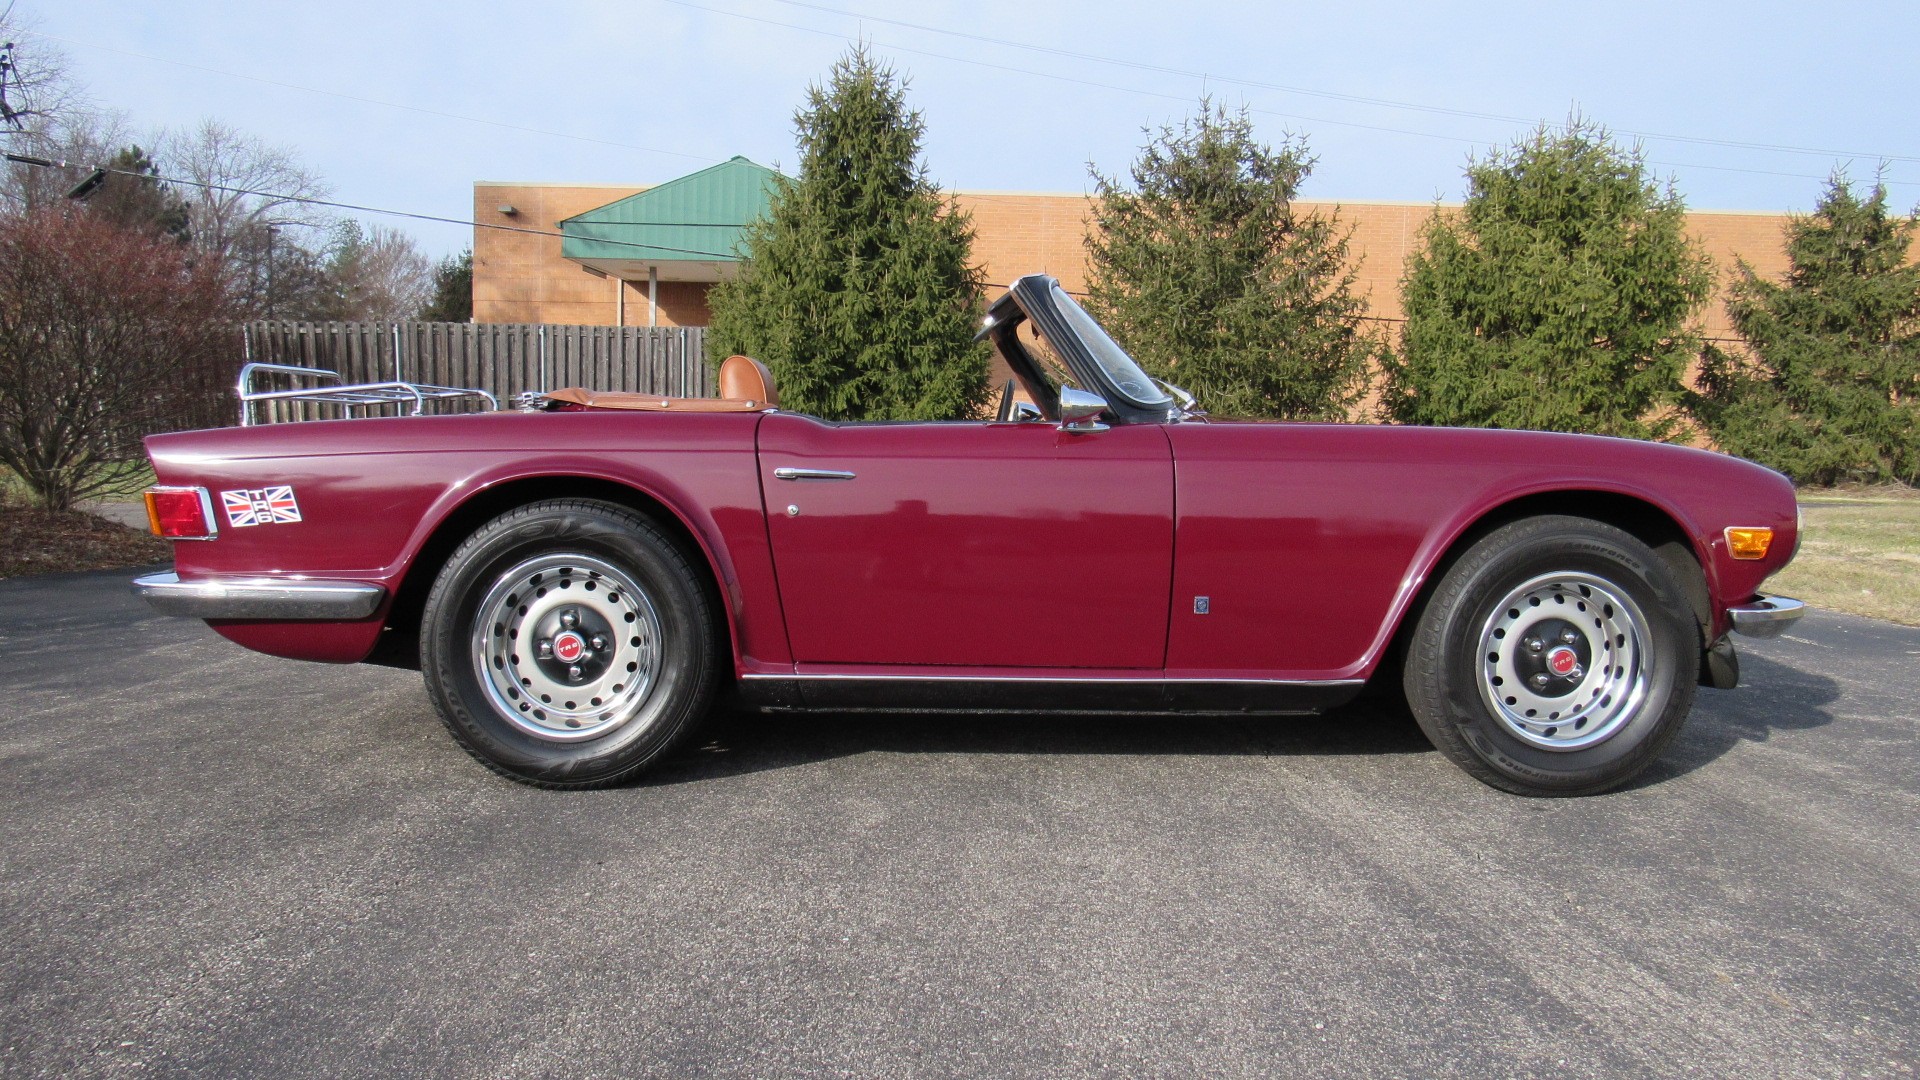 1972 TR6, 80K, Damson, Numbers Match, Restored, SOLD!